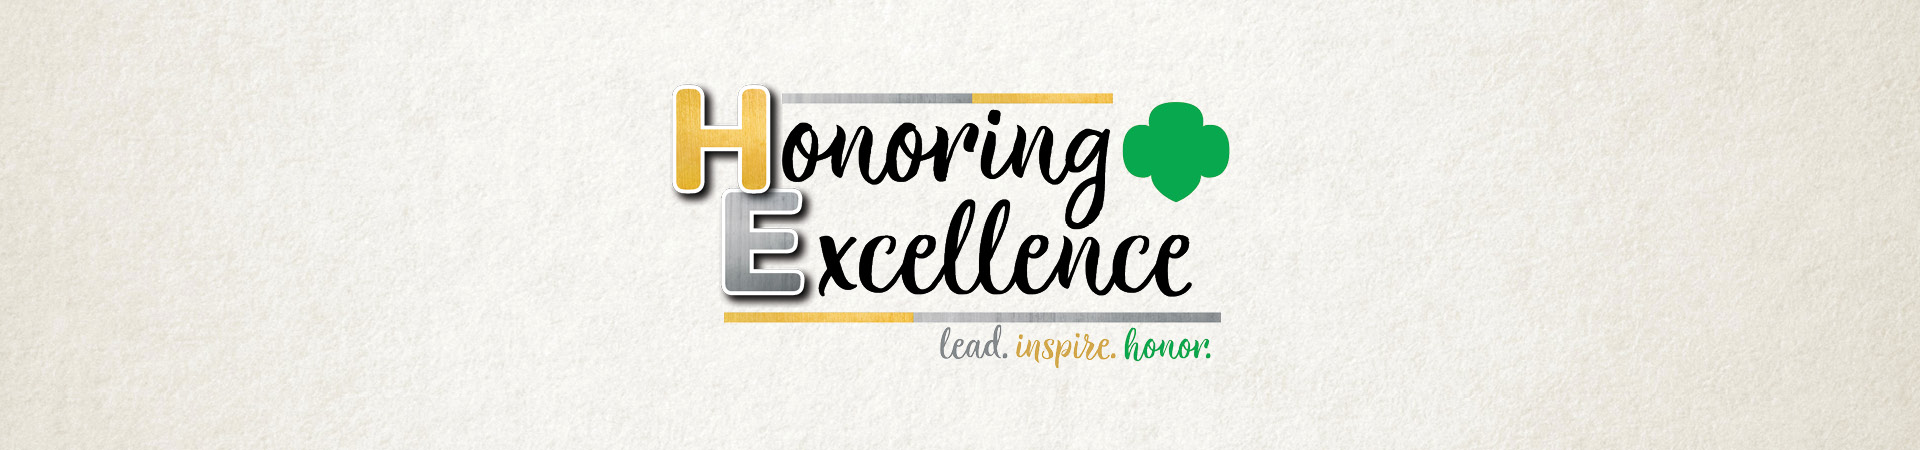  honoring excellence logo 